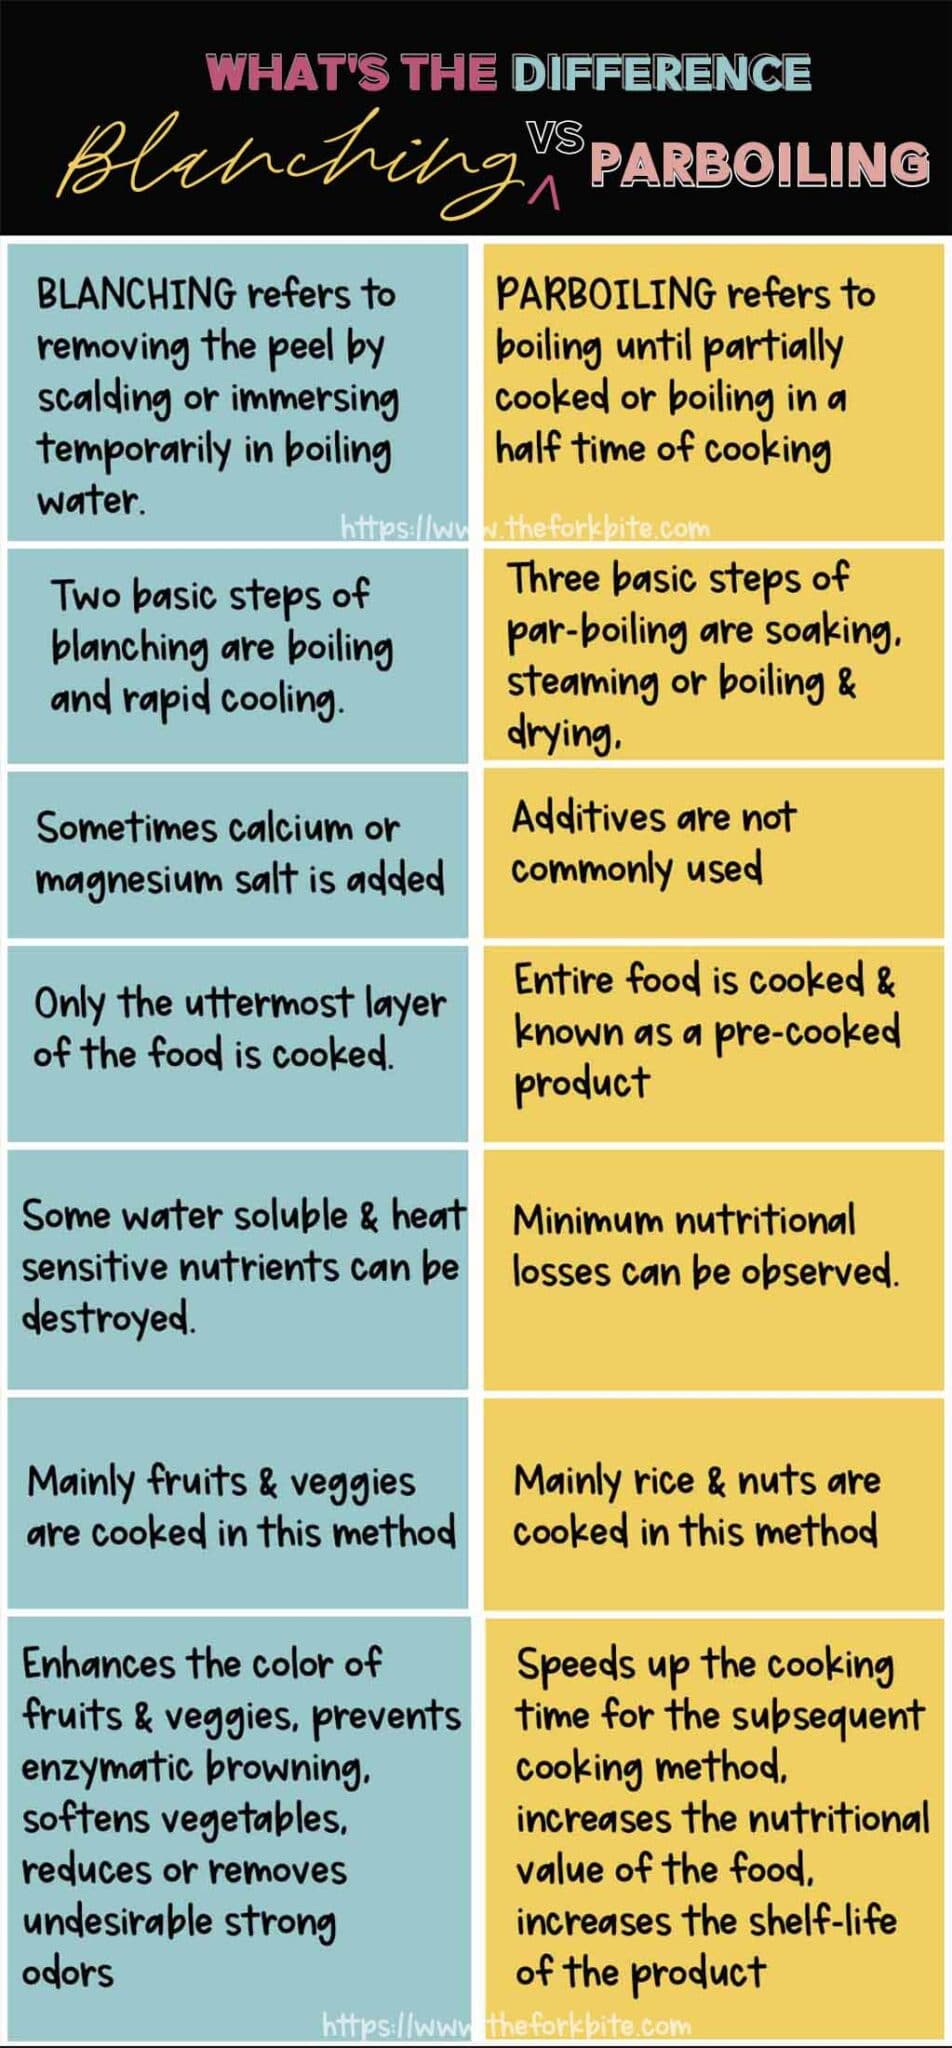 Do you know the difference between blanching and parboiling? You can check this infographic to learn the newurbanhabitat.com are both culinary terms that we often use, but they are two different processes, designed for separate outcomes.